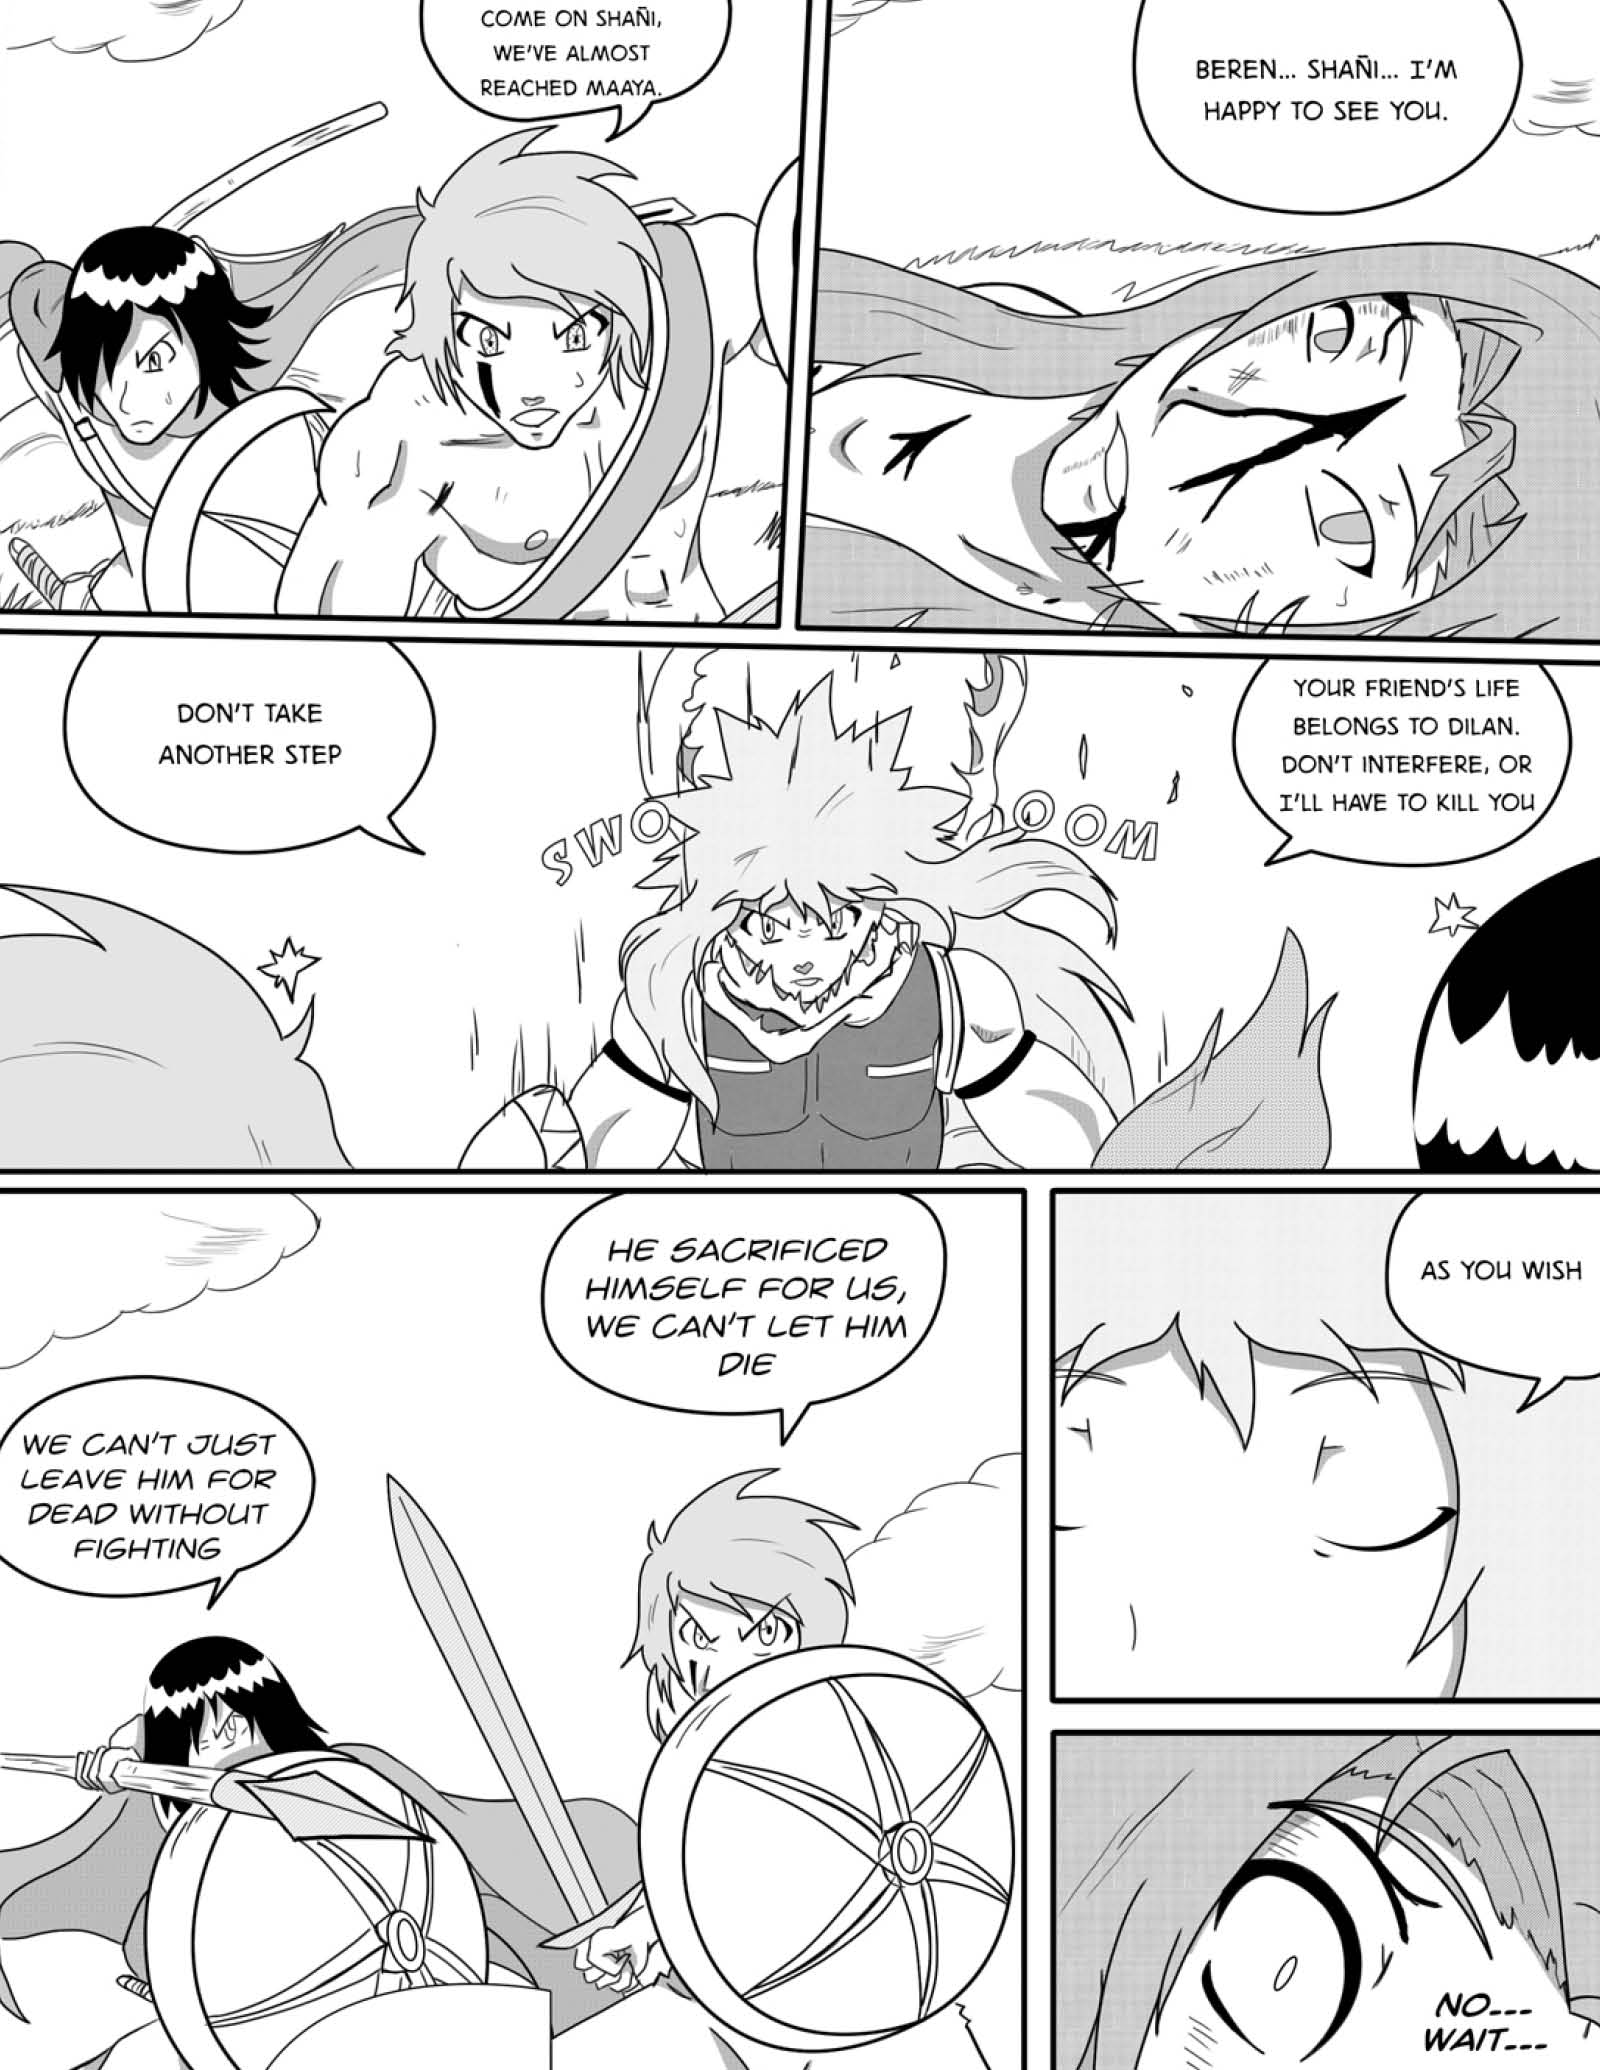 Series Dilan: the Chronicles of Covak - Chapter 4 - Page 18 - Language ENG